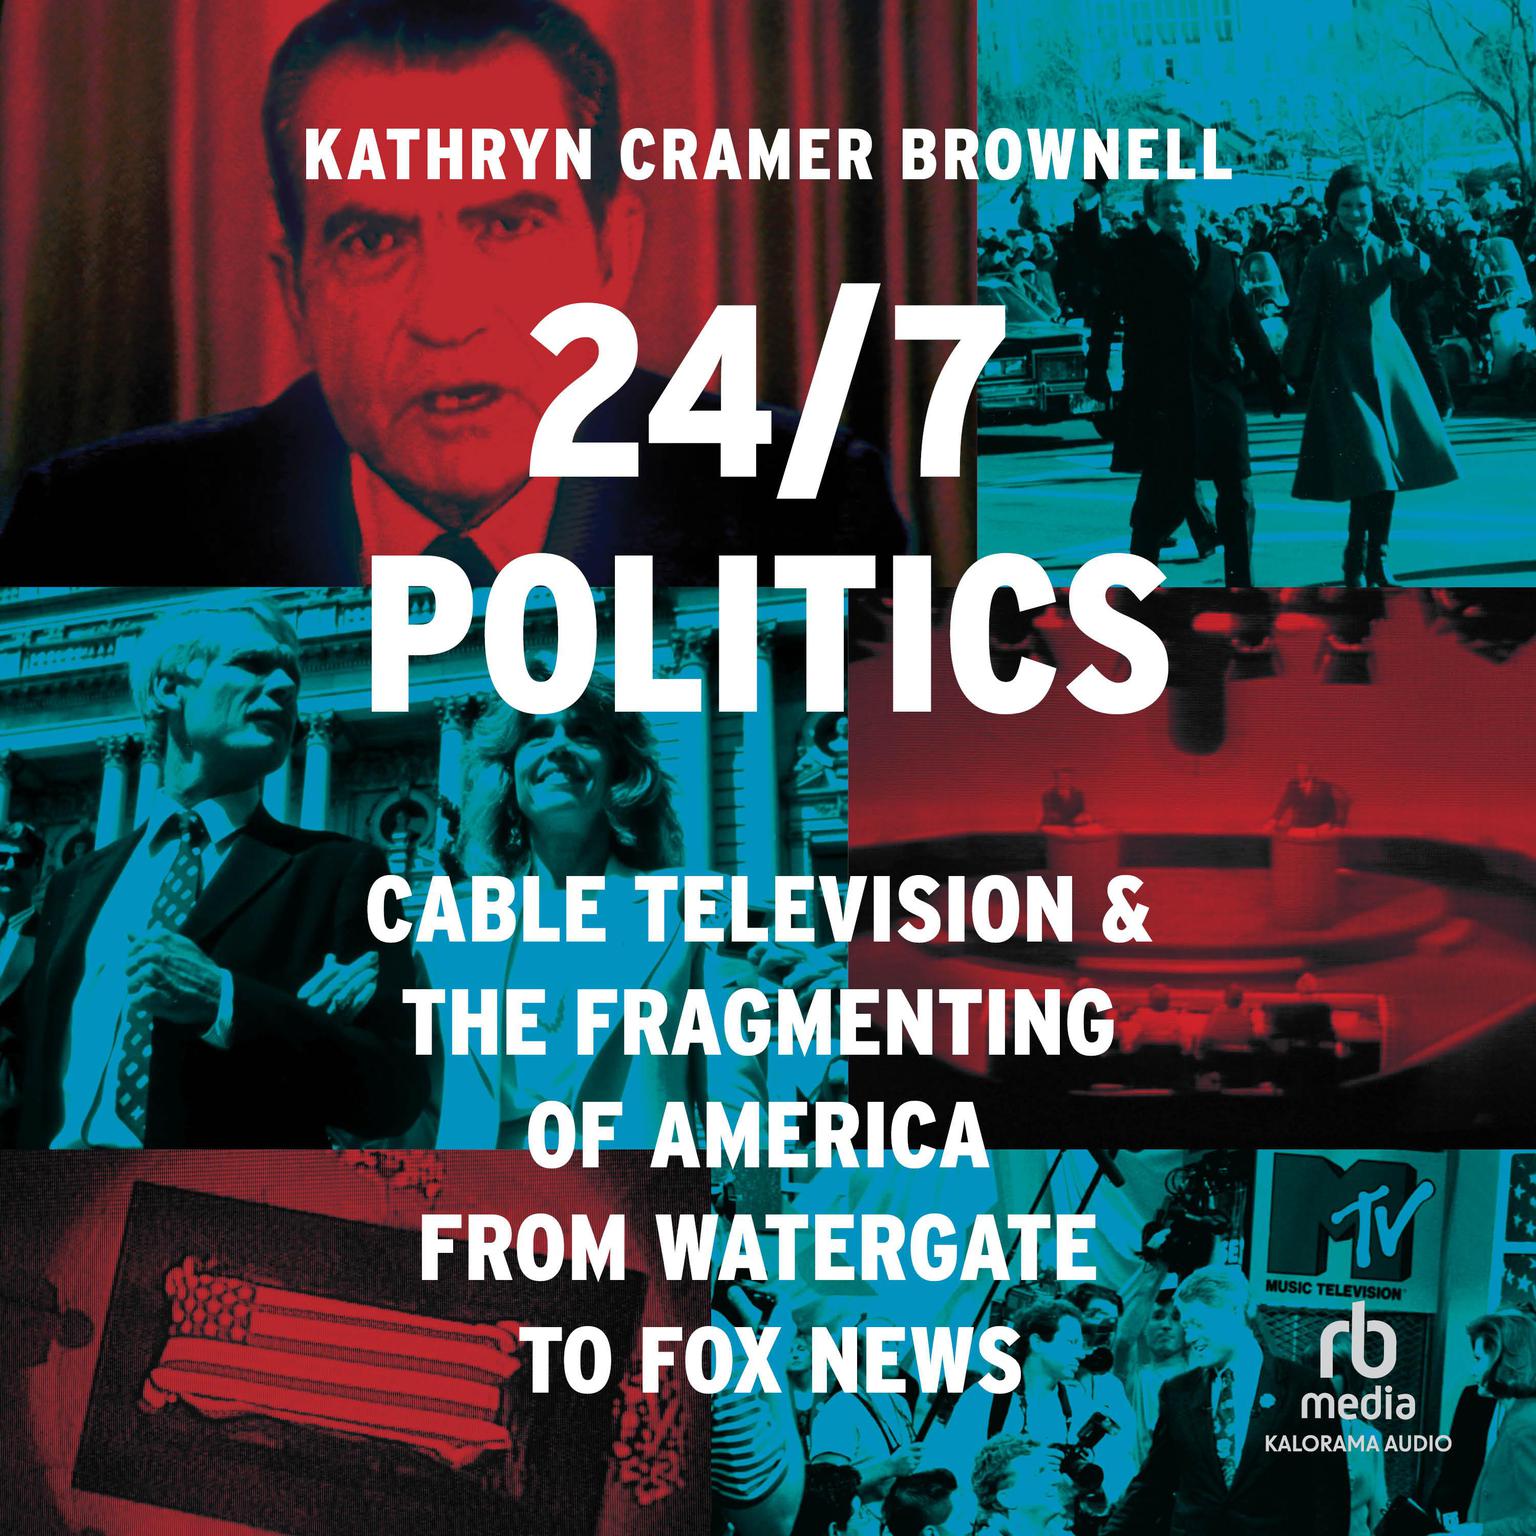 24/7 Politics: Cable Television and the Fragmenting of America from Watergate to Fox News Audiobook, by Kathryn Cramer Brownell